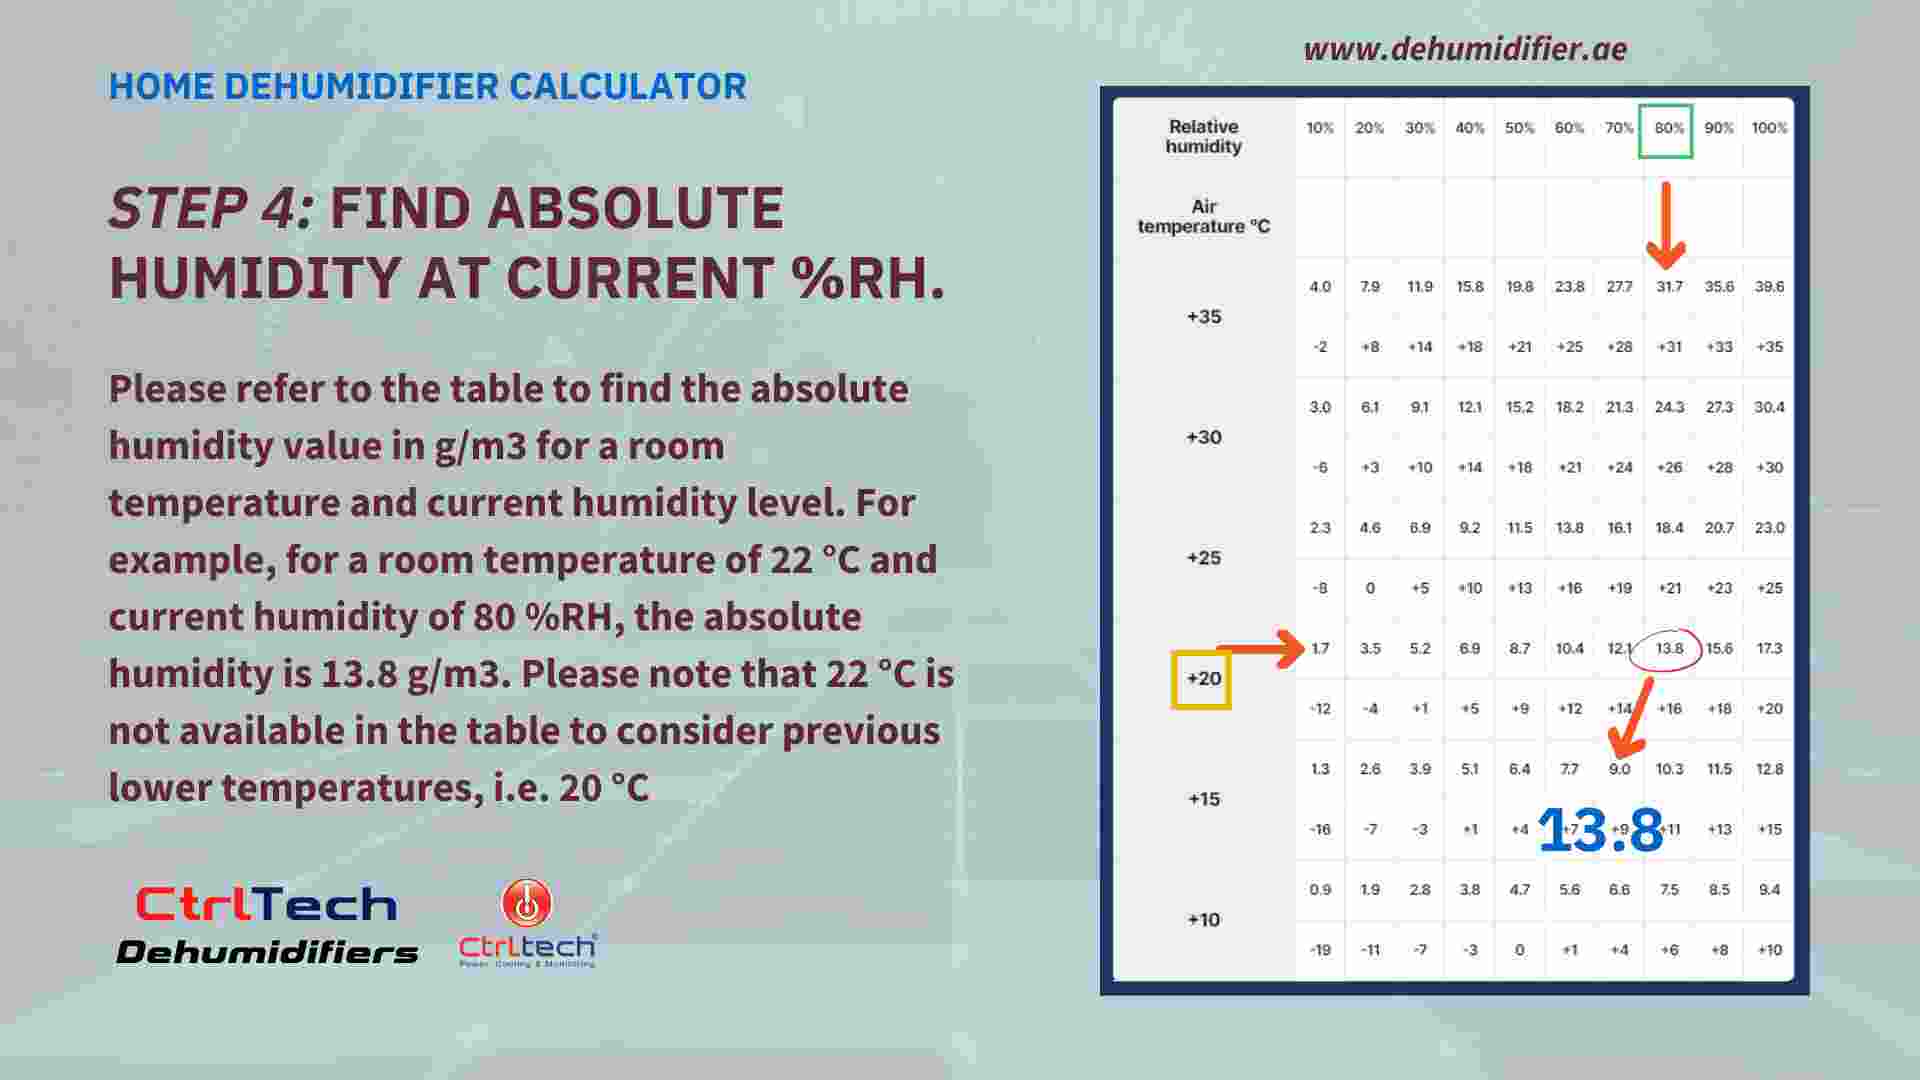 Step 4 - Find out absolute humidity at current RH